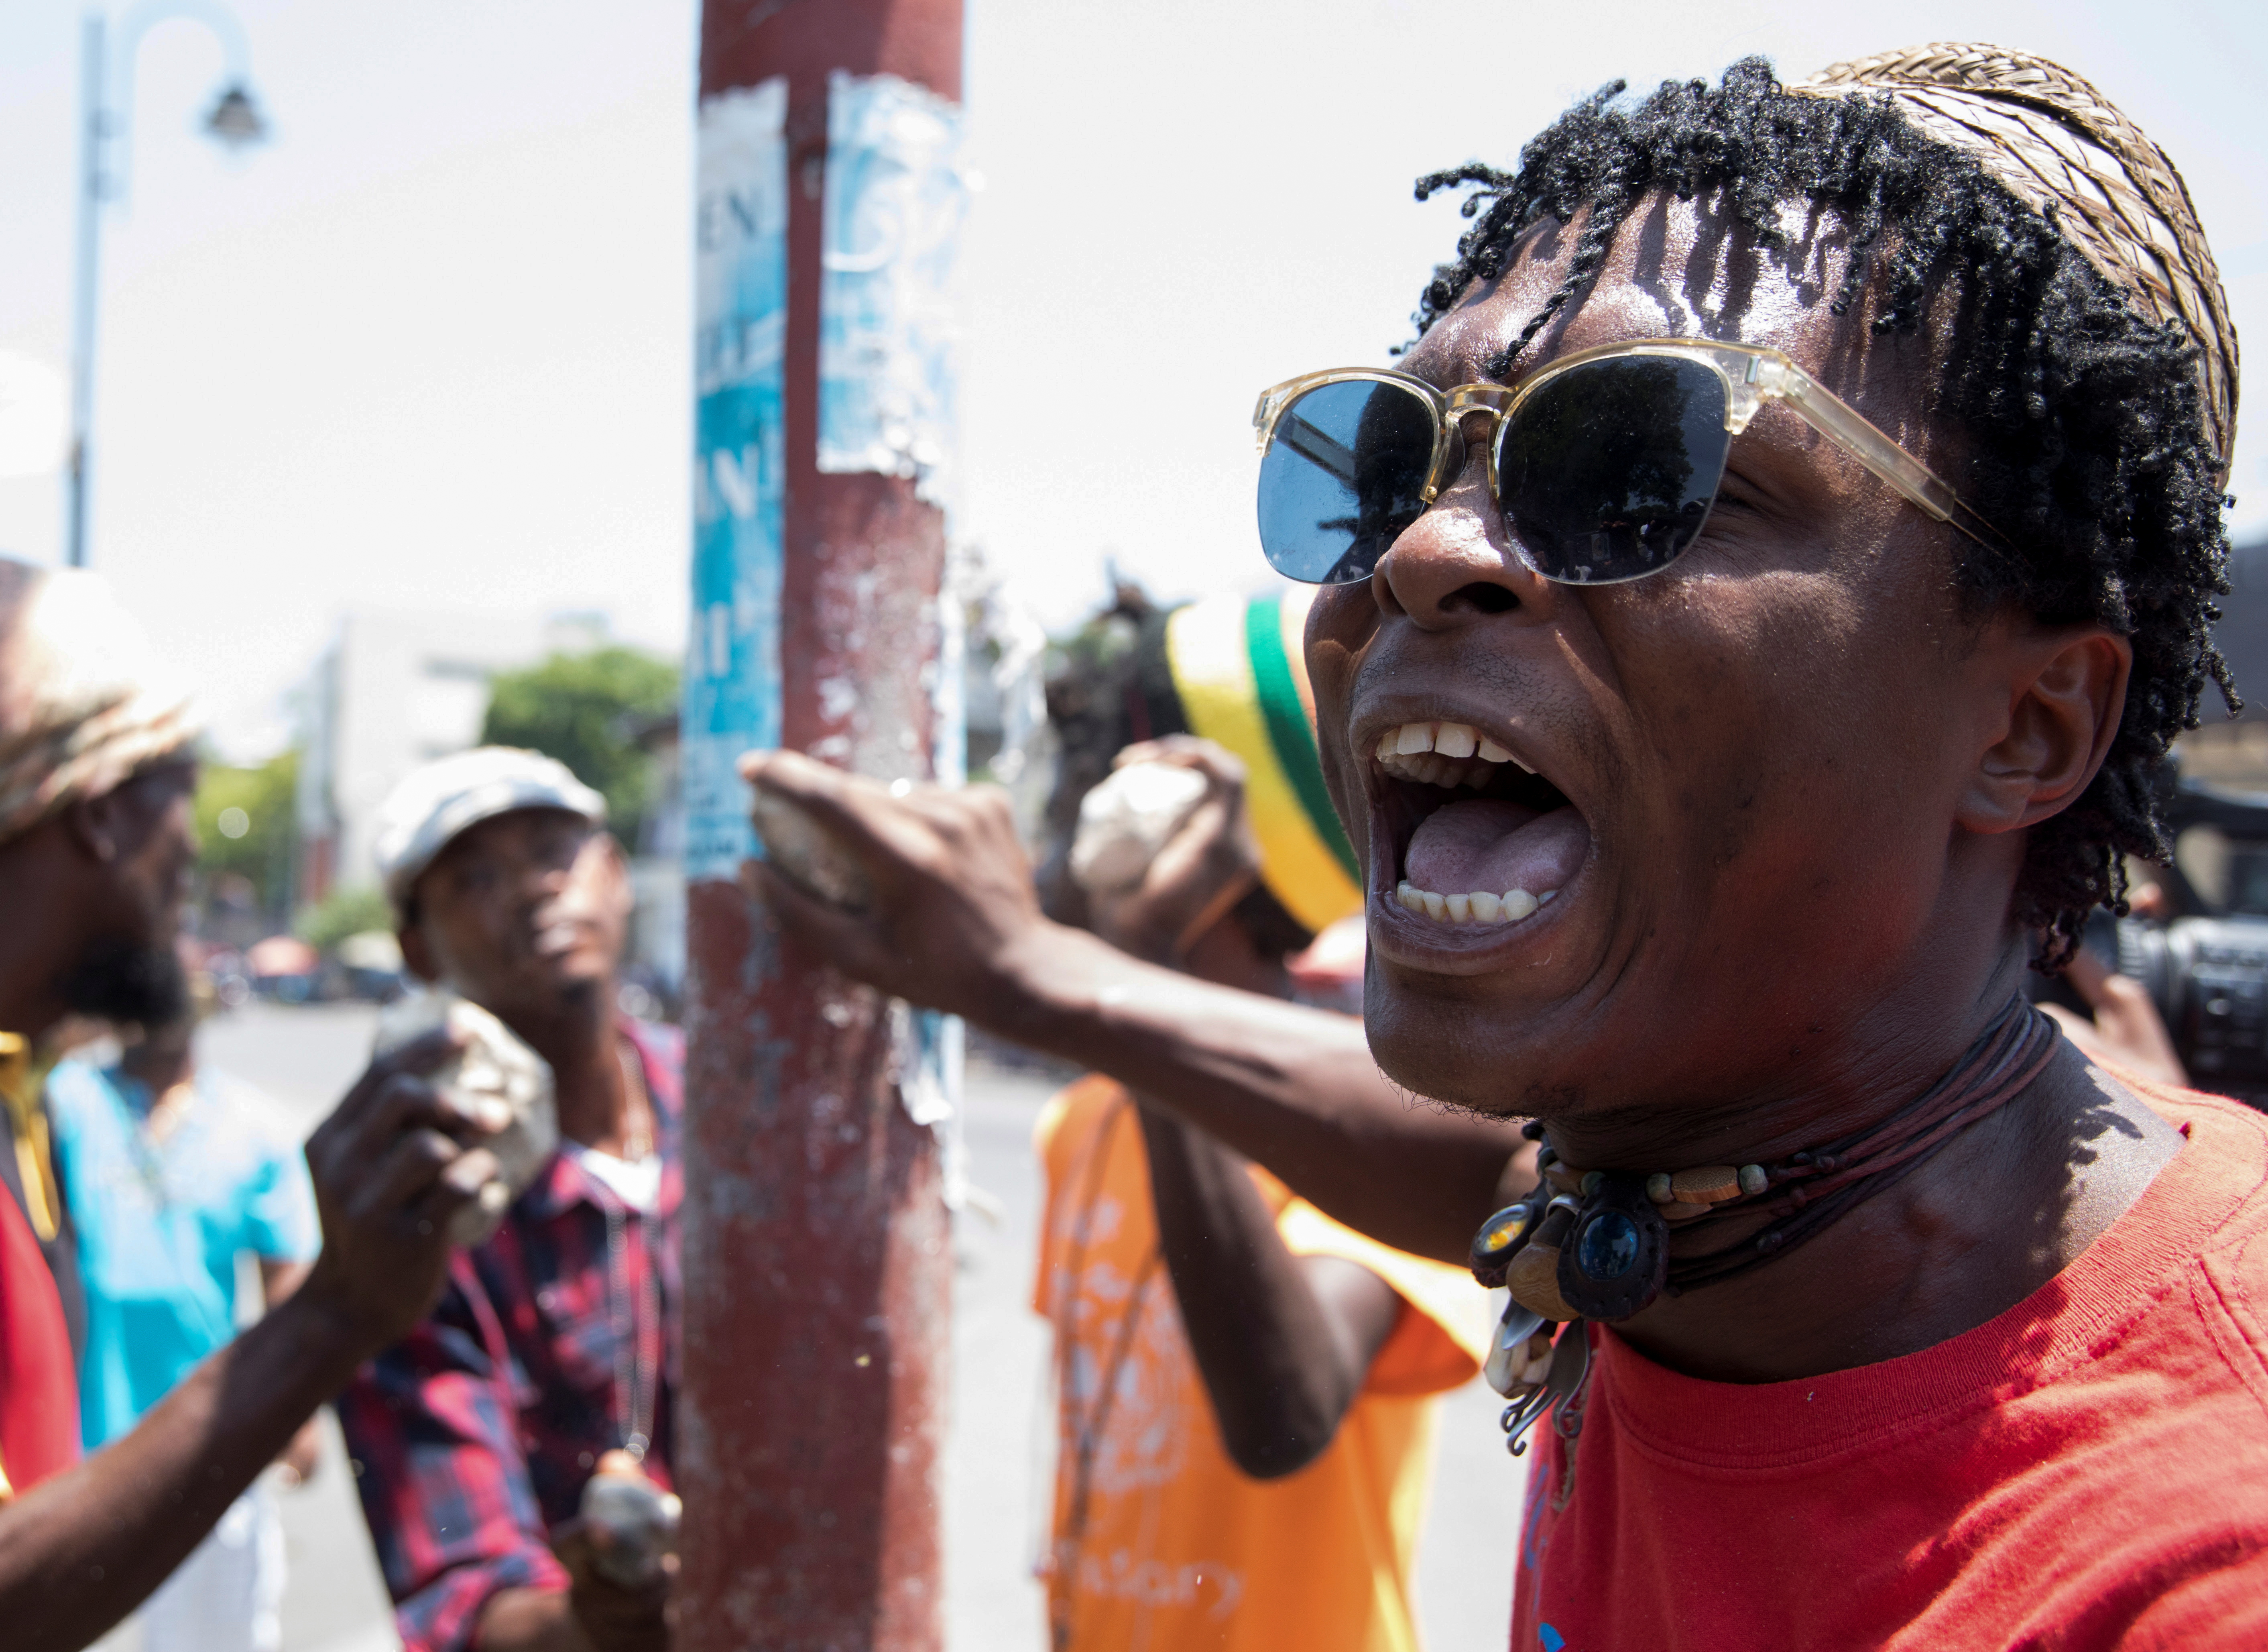 People make noise during a protest against an epidemic of kidnappings sweeping Haiti, amid deepening political unrest and economic misery, in Port-au-Prince, Haiti April 15, 2021.  REUTERS/Valerie Baeriswyl